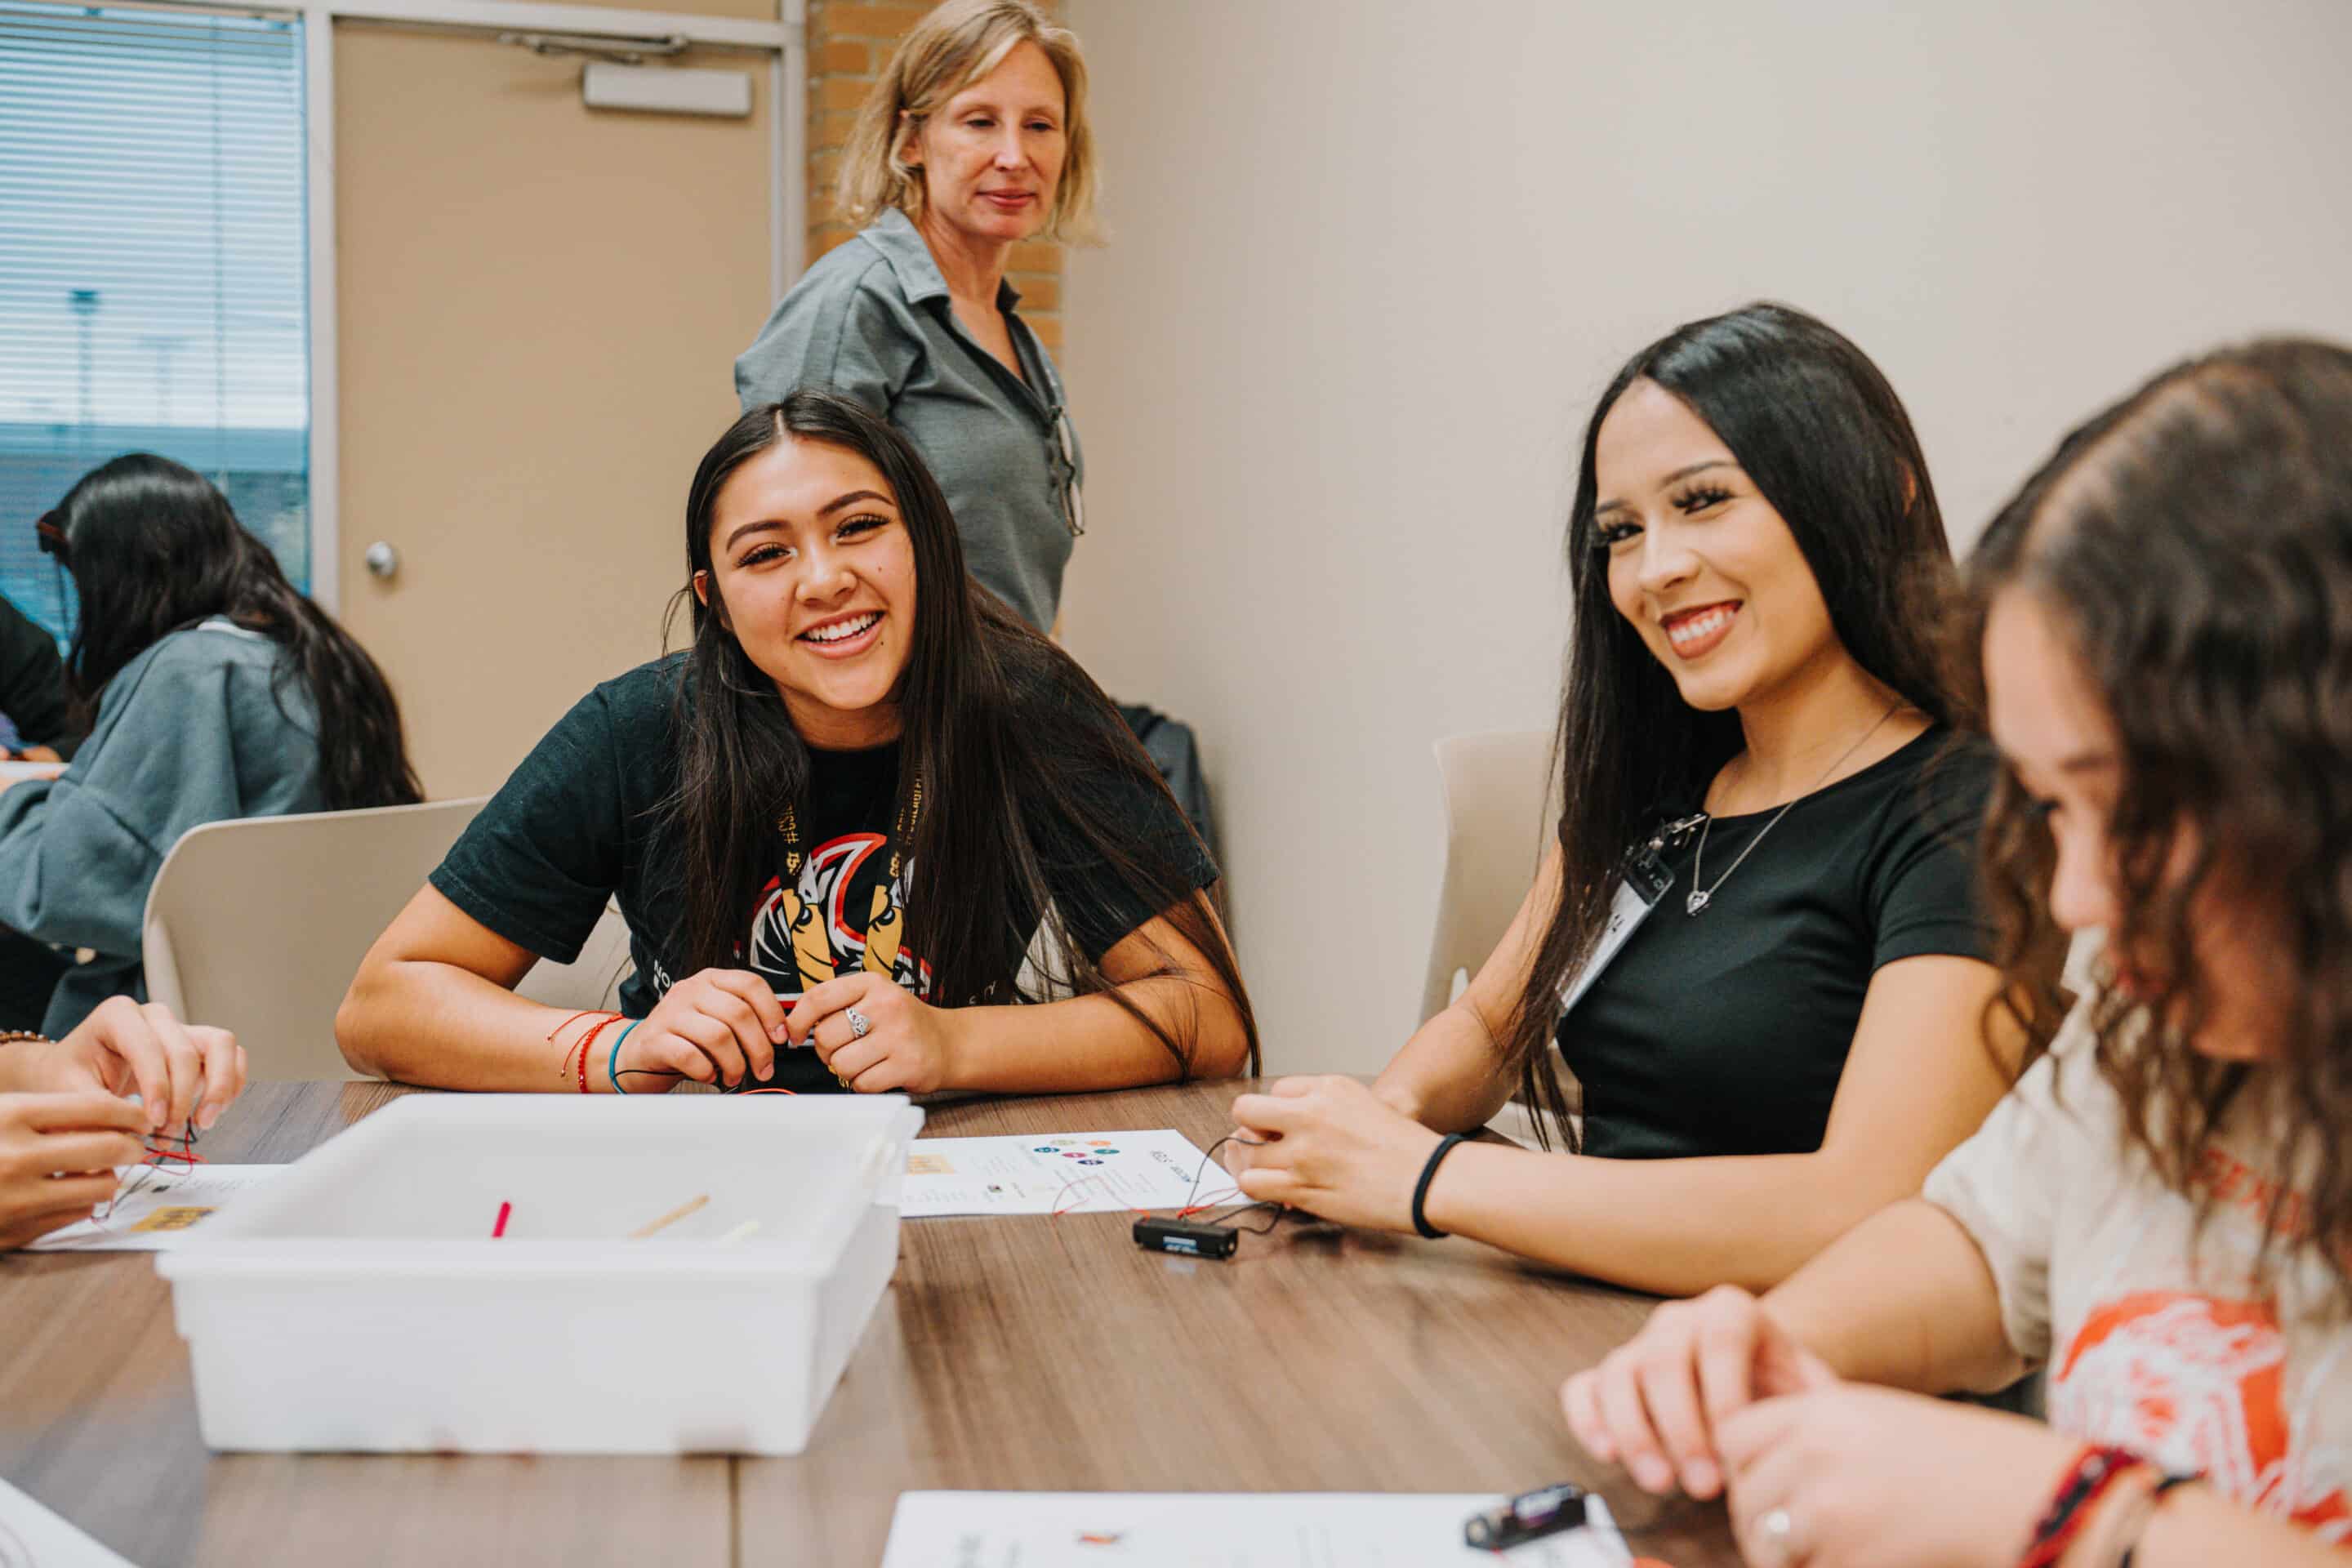 Hispanic students smiling during a group project in a classroom